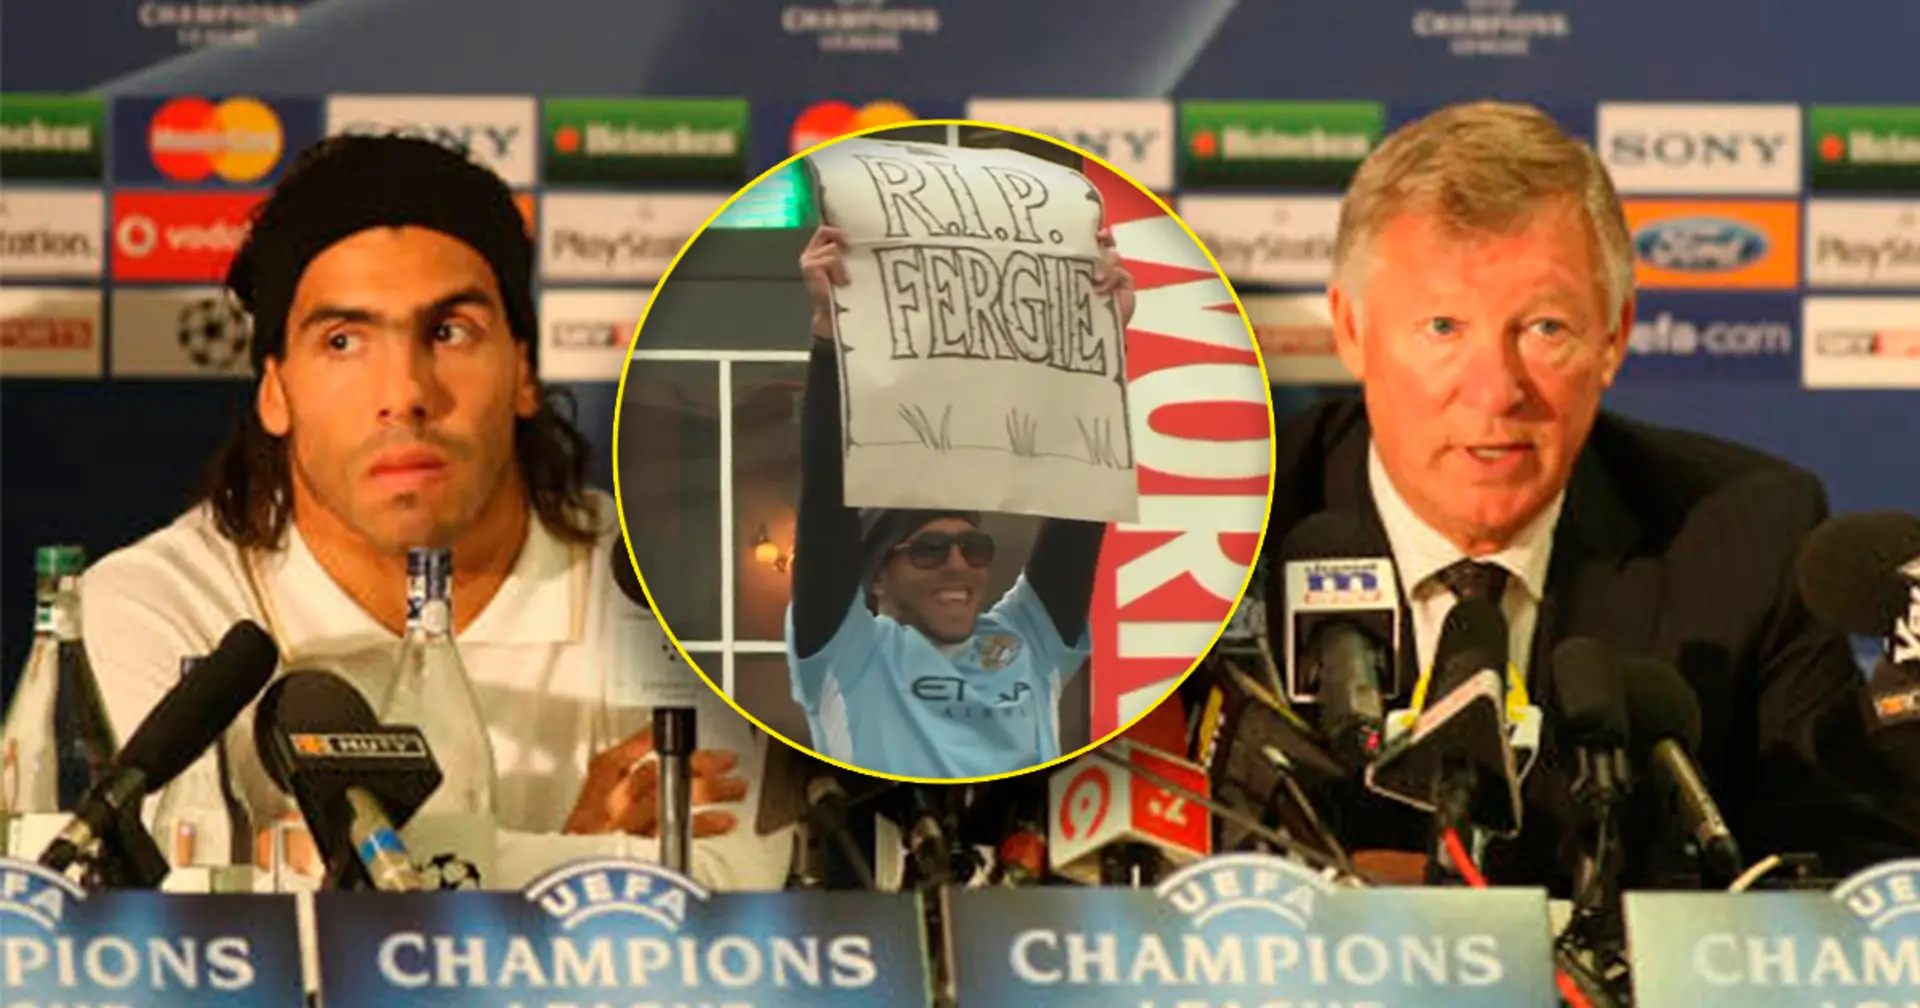 Carlos Tevez explains why he never apologized for 'RIP Fergie' banner